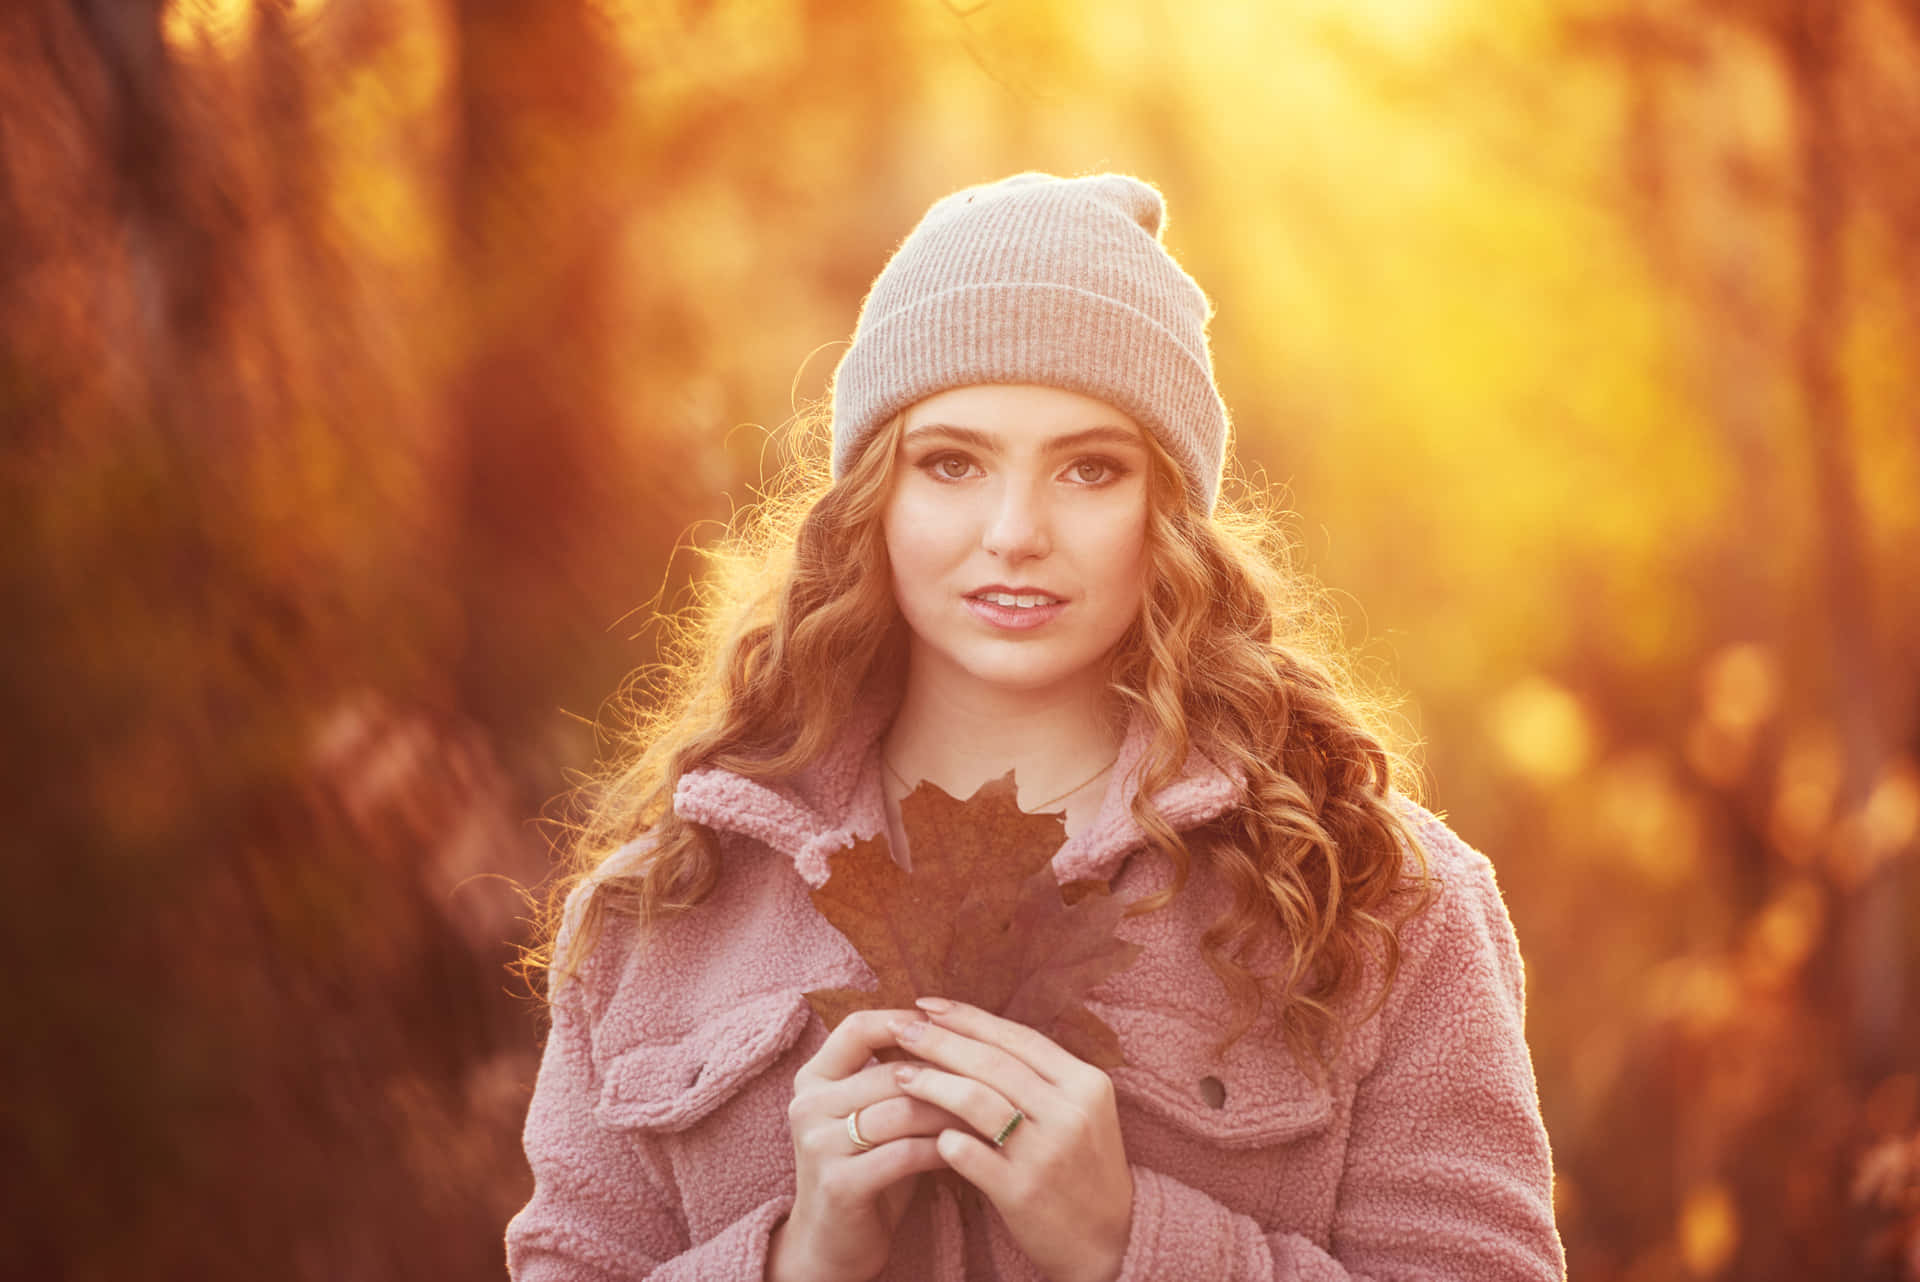 Capture the moment. Celebrate the season with senior fall pictures.